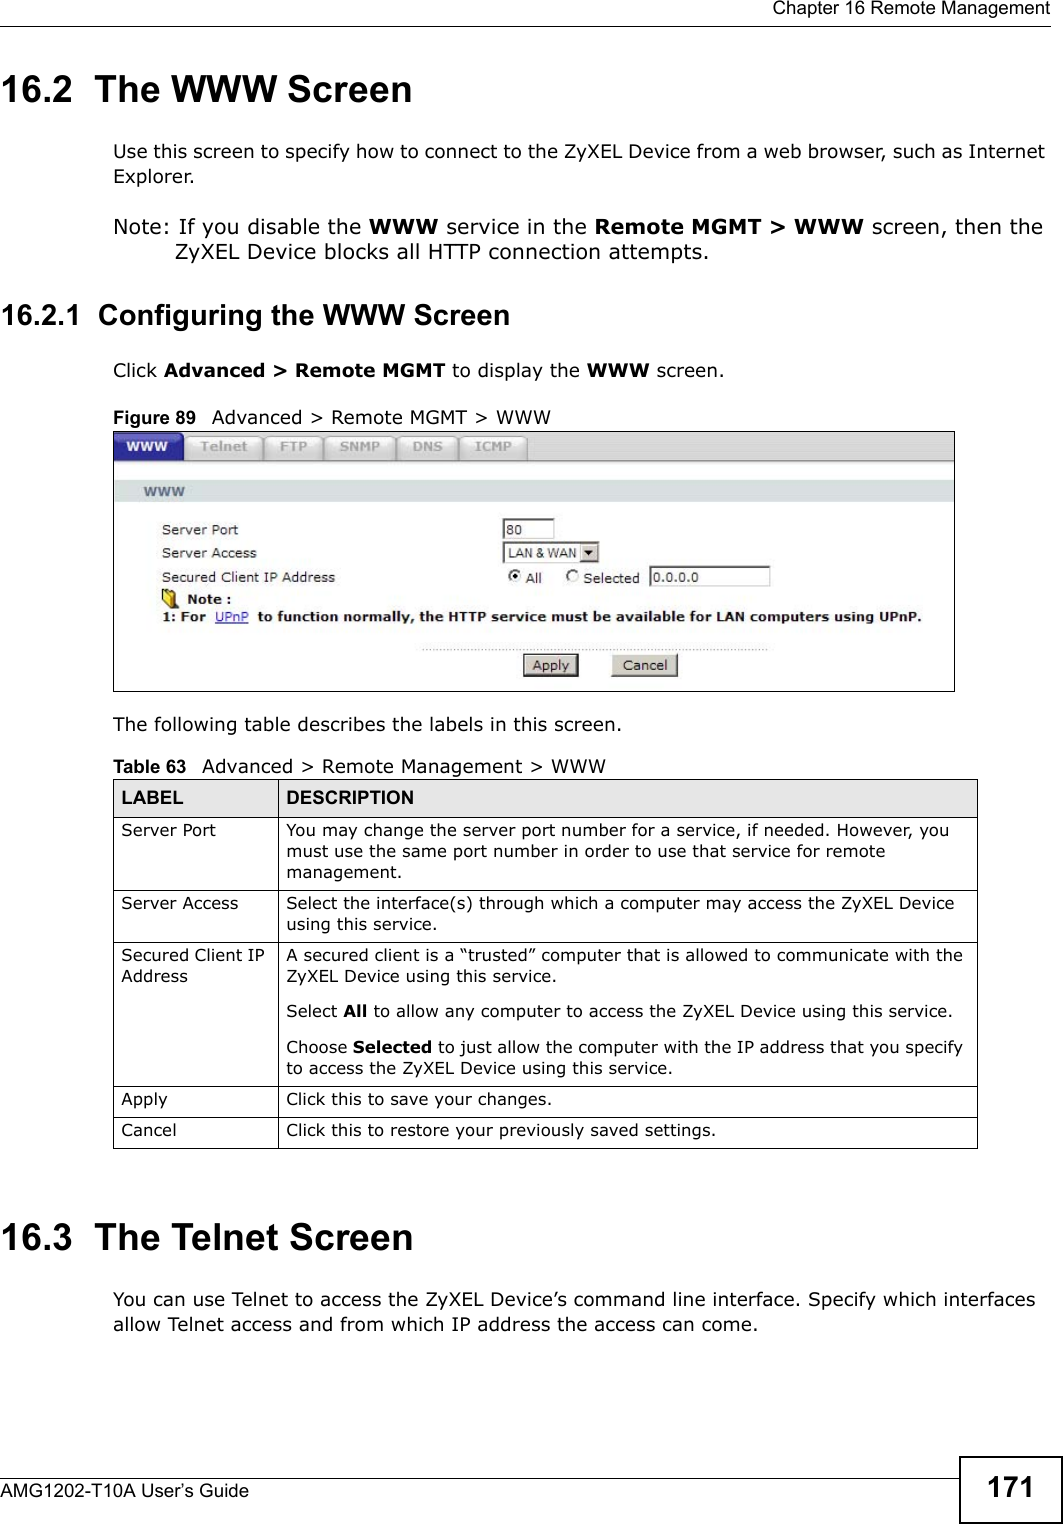  Chapter 16 Remote ManagementAMG1202-T10A User’s Guide 17116.2  The WWW ScreenUse this screen to specify how to connect to the ZyXEL Device from a web browser, such as Internet Explorer. Note: If you disable the WWW service in the Remote MGMT &gt; WWW screen, then the ZyXEL Device blocks all HTTP connection attempts.16.2.1  Configuring the WWW ScreenClick Advanced &gt; Remote MGMT to display the WWW screen.Figure 89   Advanced &gt; Remote MGMT &gt; WWWThe following table describes the labels in this screen.16.3  The Telnet ScreenYou can use Telnet to access the ZyXEL Device’s command line interface. Specify which interfaces allow Telnet access and from which IP address the access can come.Table 63   Advanced &gt; Remote Management &gt; WWWLABEL DESCRIPTIONServer Port You may change the server port number for a service, if needed. However, you must use the same port number in order to use that service for remote management.Server Access Select the interface(s) through which a computer may access the ZyXEL Device using this service.Secured Client IP AddressA secured client is a “trusted” computer that is allowed to communicate with the ZyXEL Device using this service. Select All to allow any computer to access the ZyXEL Device using this service.Choose Selected to just allow the computer with the IP address that you specify to access the ZyXEL Device using this service.Apply Click this to save your changes.Cancel Click this to restore your previously saved settings.